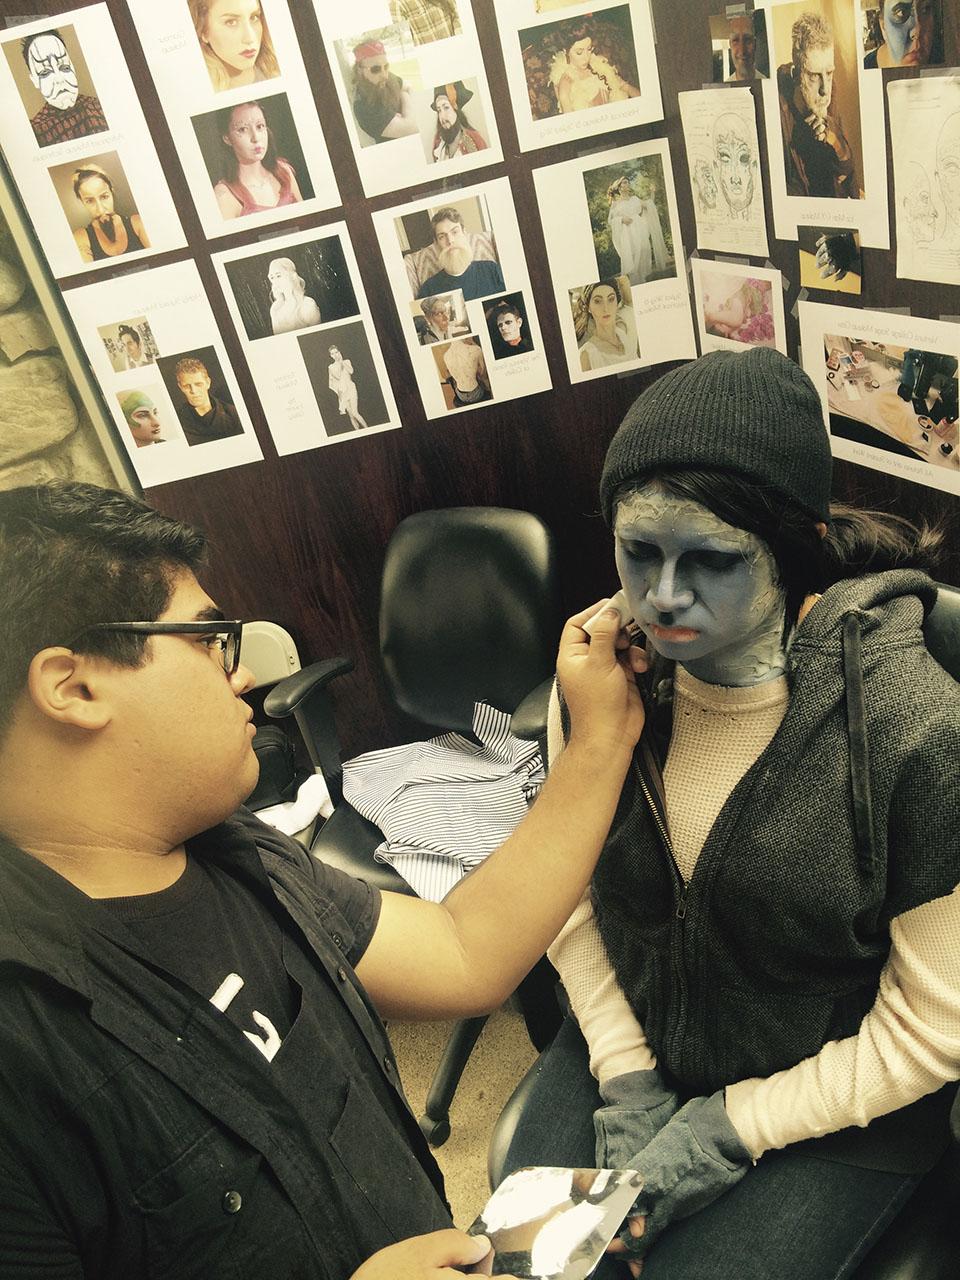 A male student with dark hair applies a monster gray character makeup to a student wearing a black beanie. Makeup images can be seen on the wall behind them.